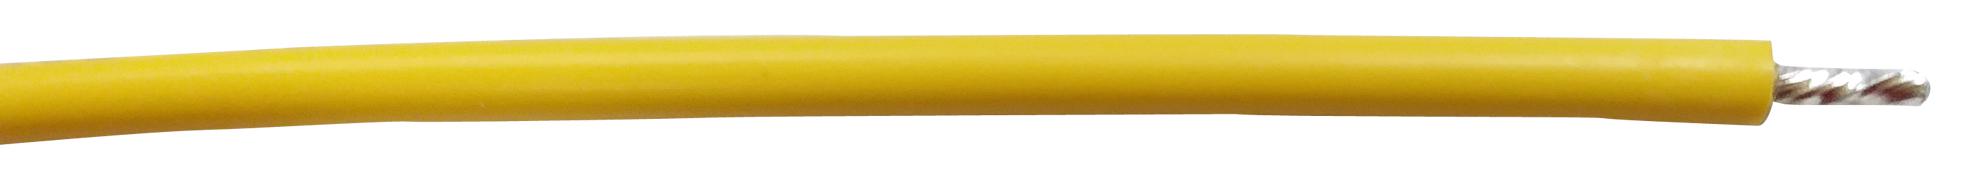 PRO POWER Single Wire PP002601 CABLE WIRE, 24AWG, YELLOW, 305M PRO POWER 2986827 PP002601